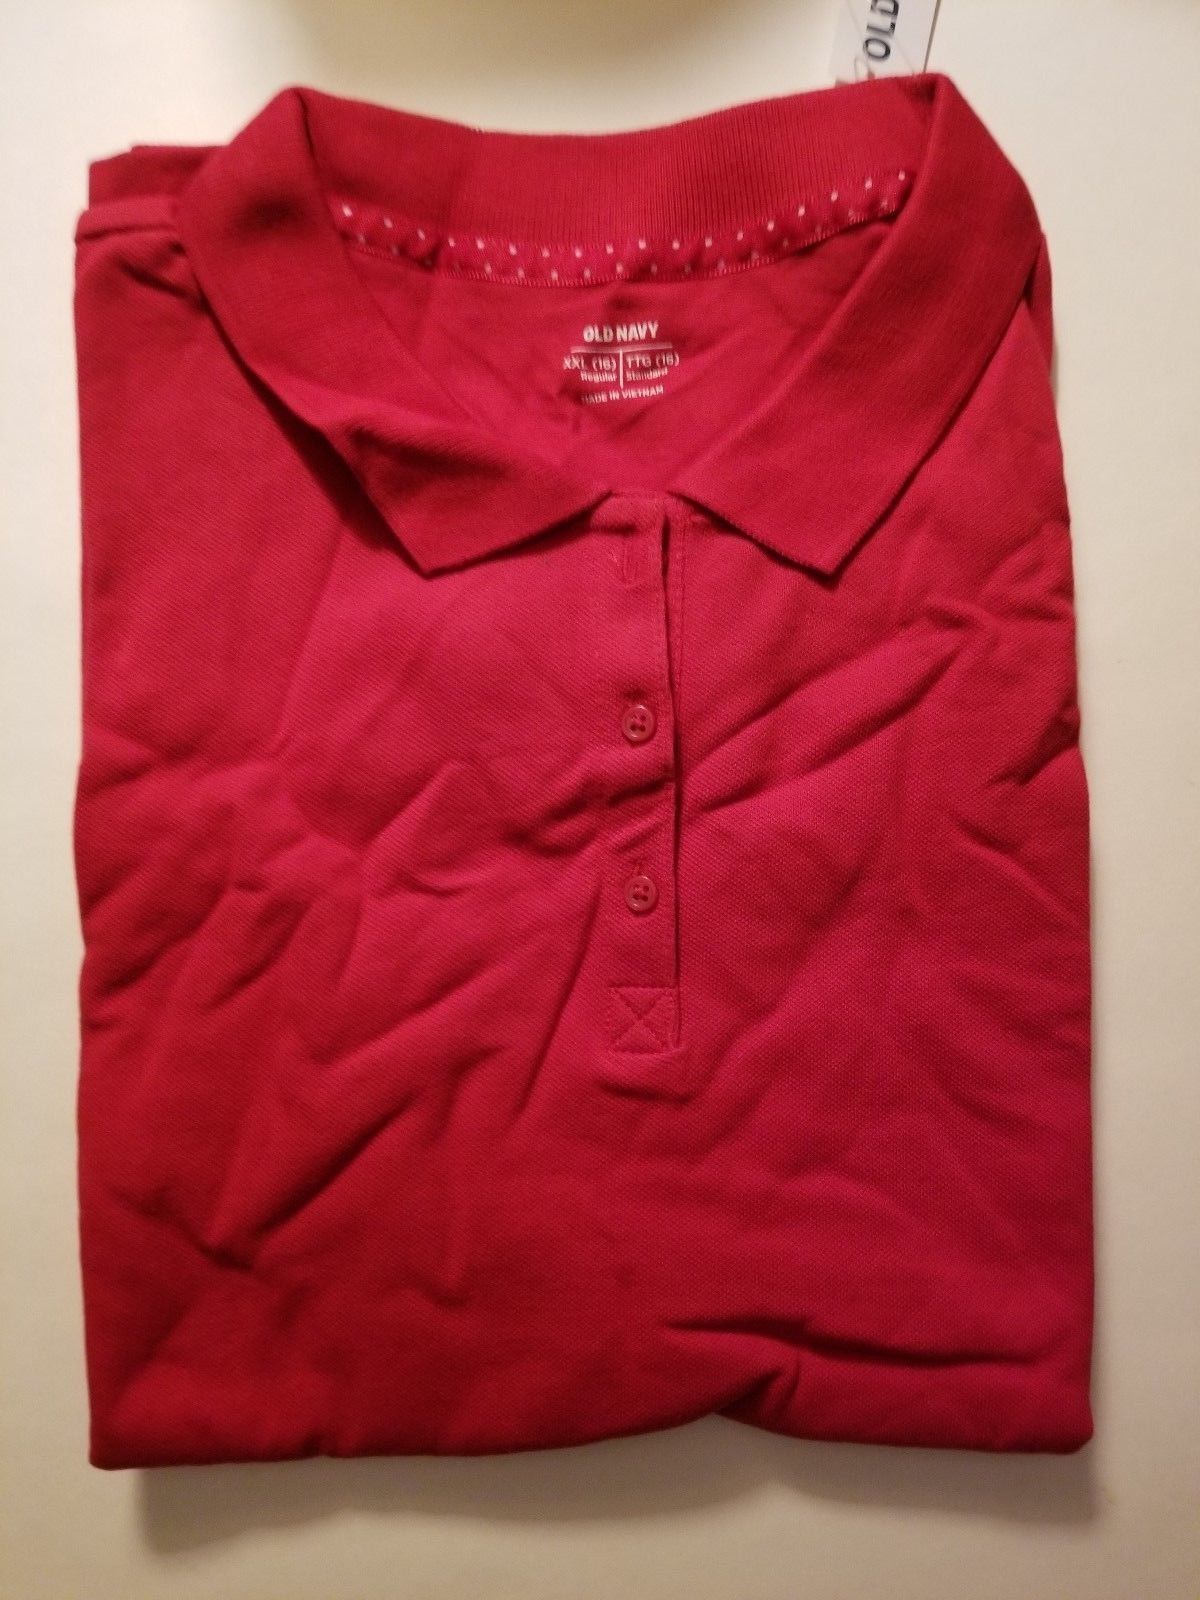 Primary image for Old Navy Girls Red Long Sleeve Polo Size  XXL 16 NWT NEW  